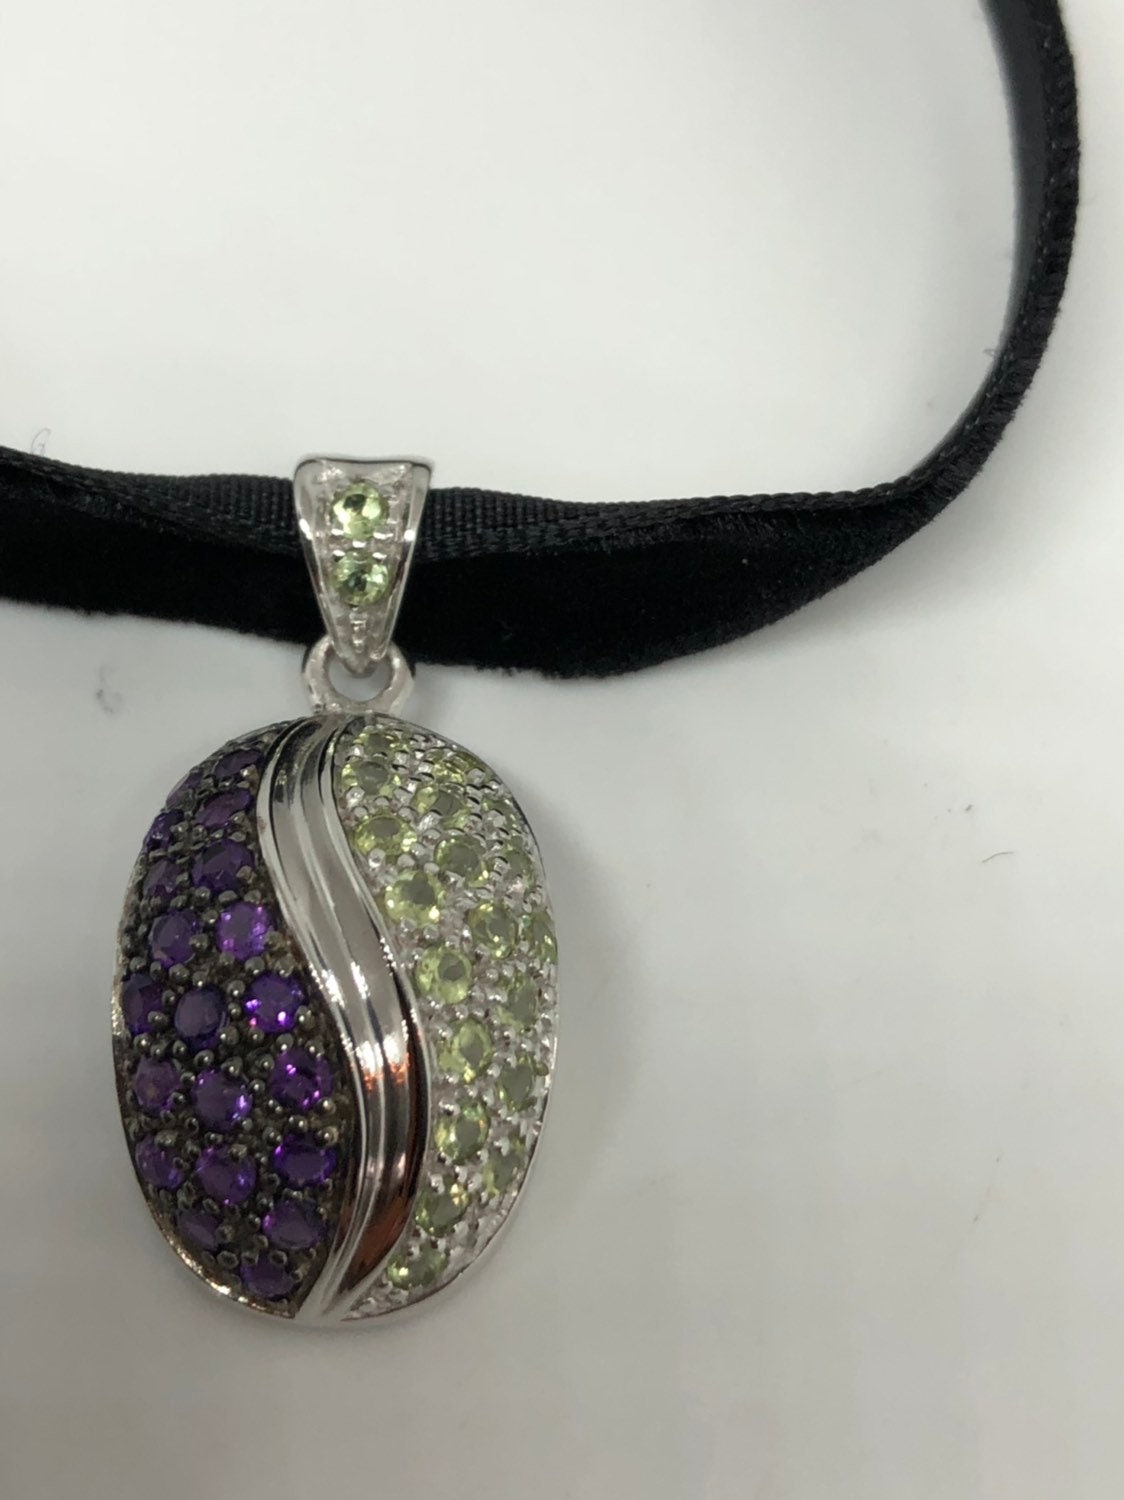 Vintage Handmade 925 Sterling Silver Genuine Peridot and Amethyst Antique Pendant Necklace